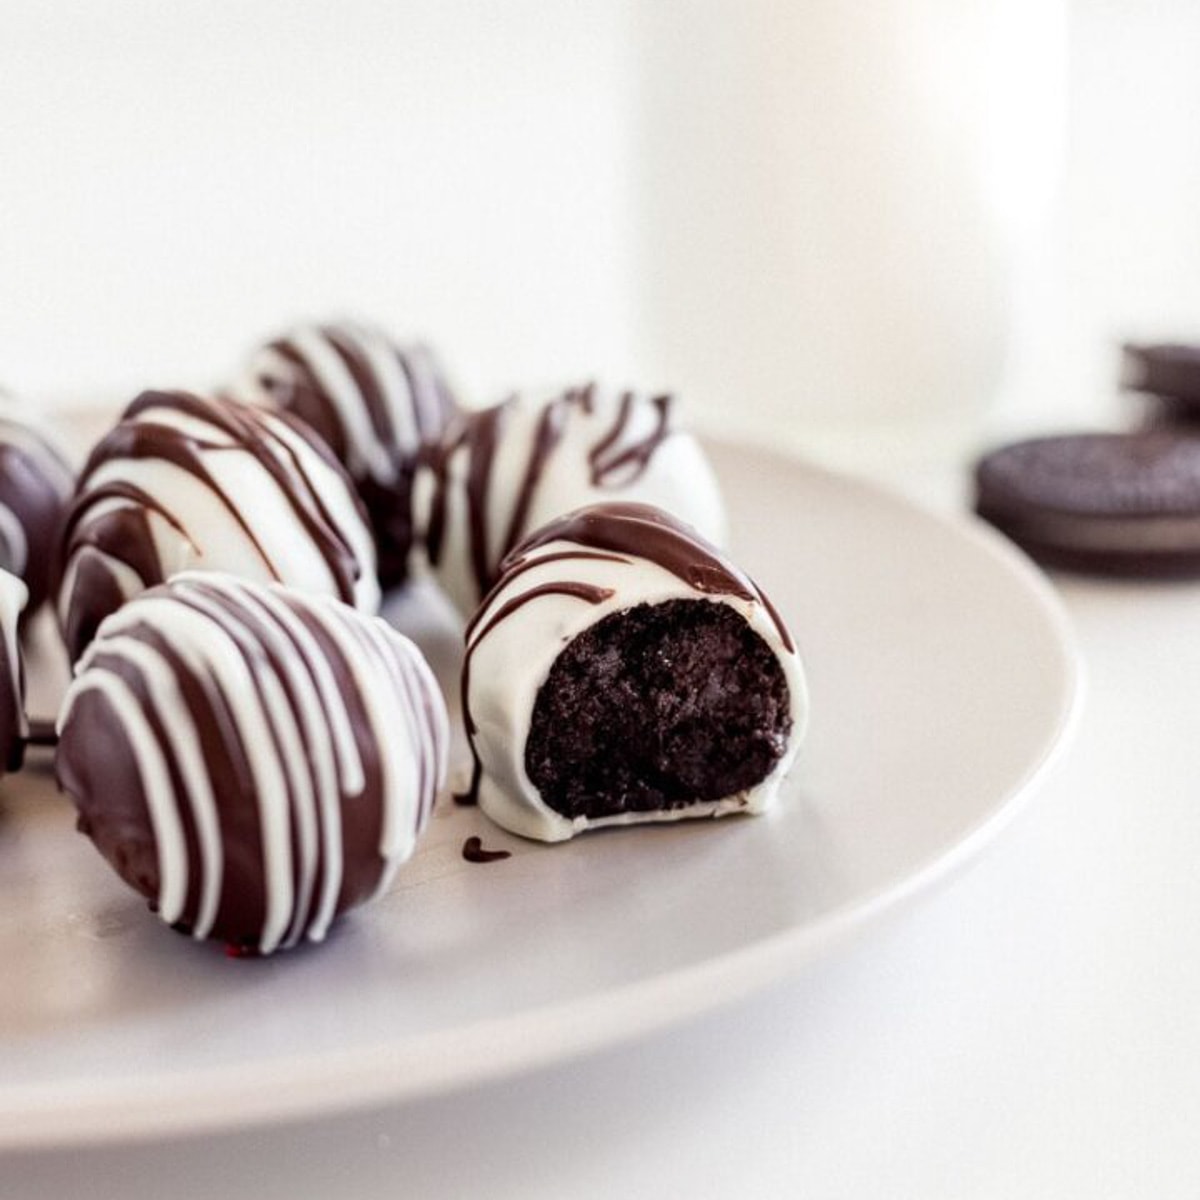 oreo truffle with a bite on plate with more oreo truffles.